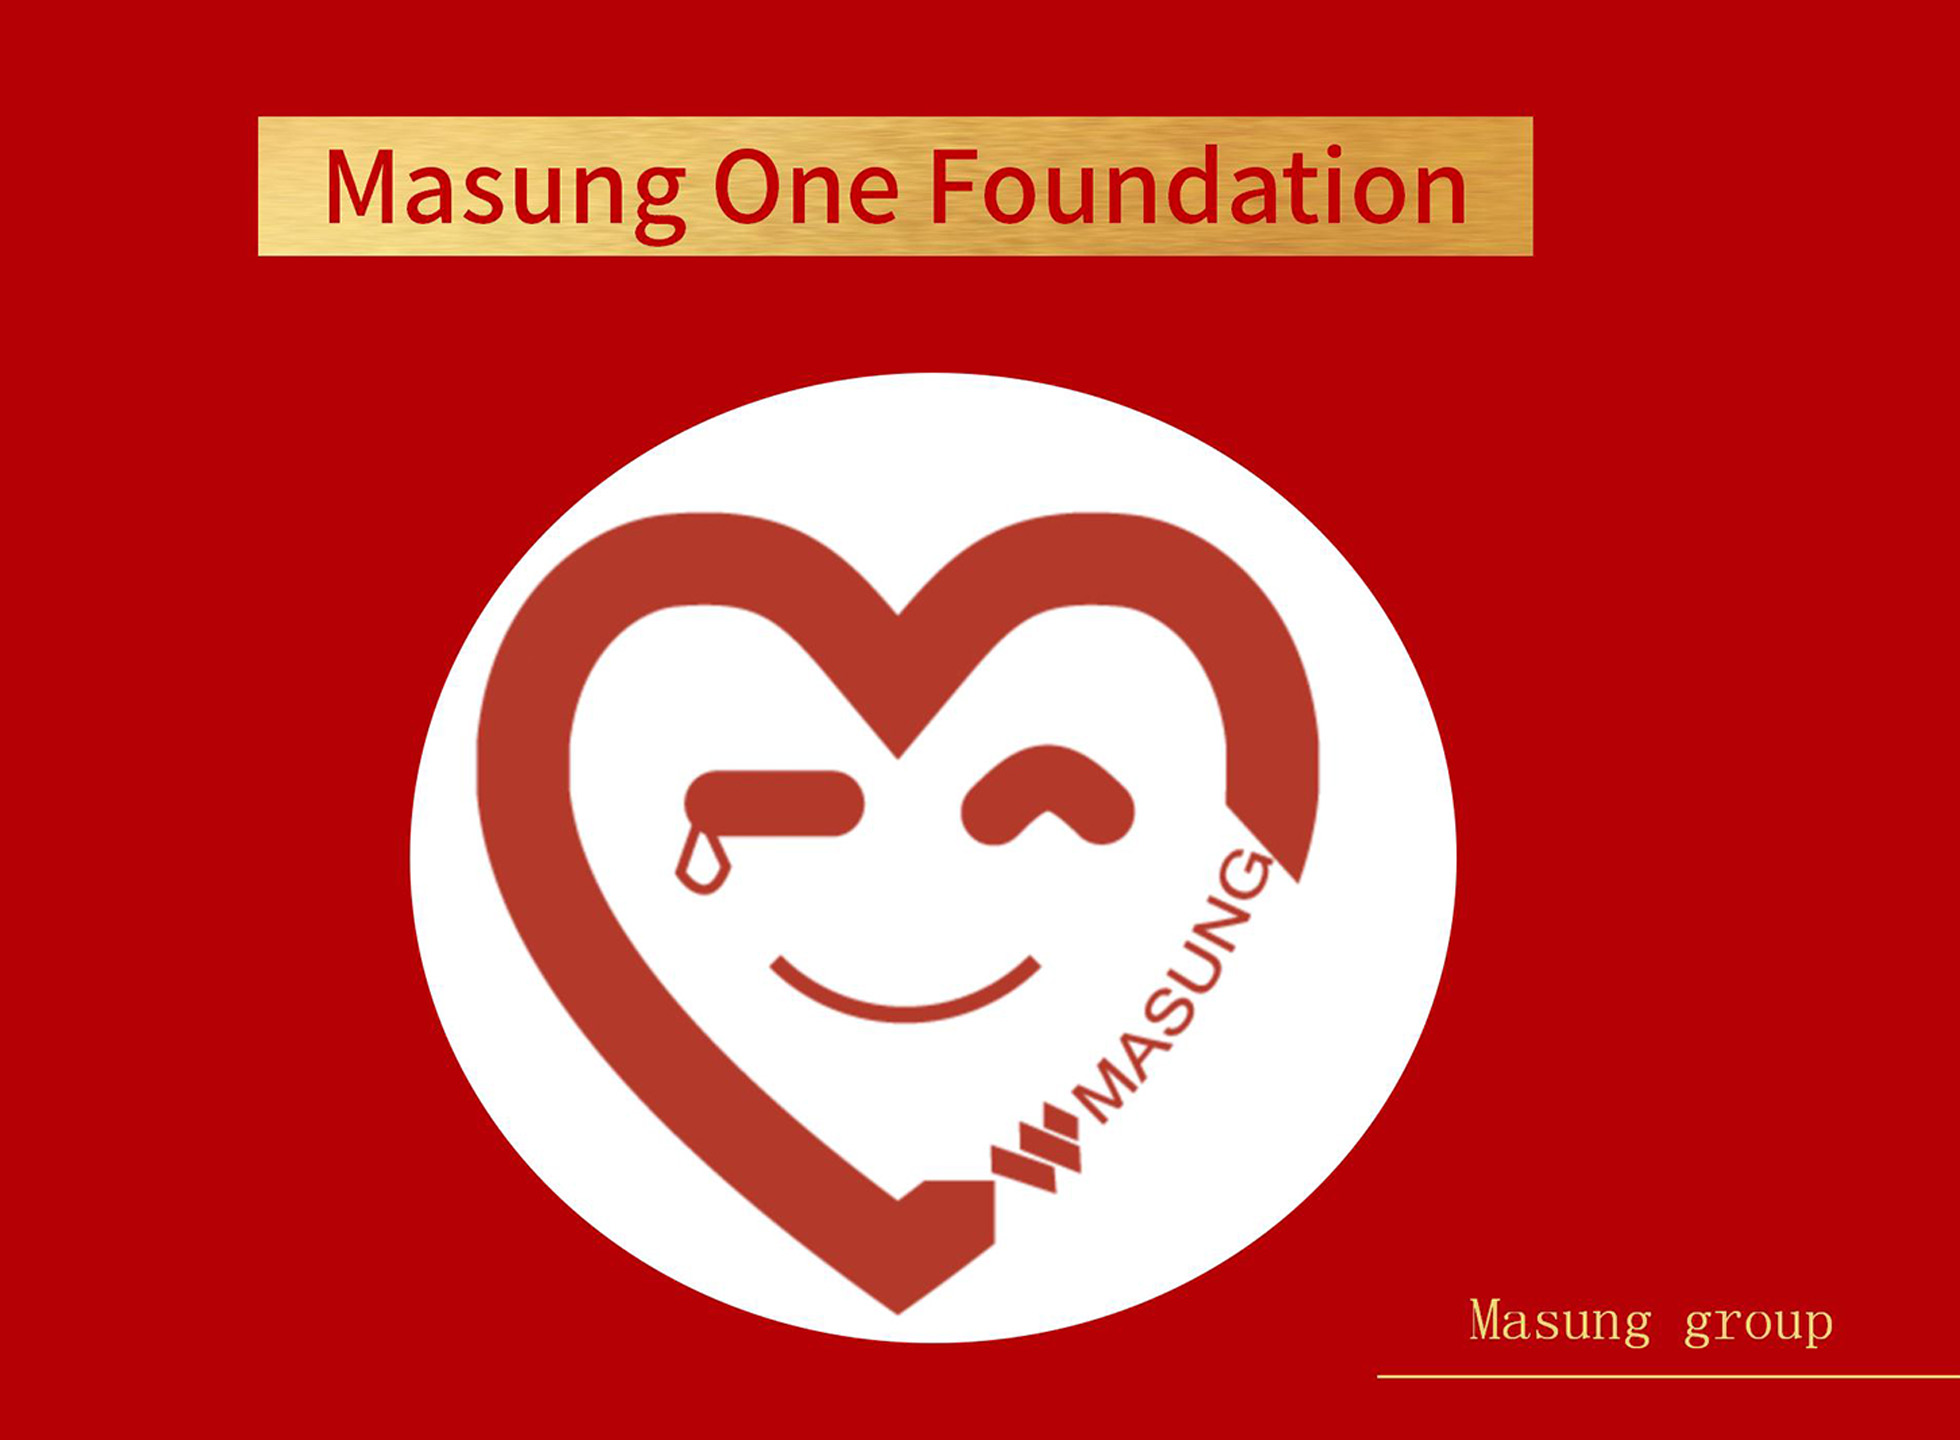 Masung One Foundation sends care and warms people's hearts